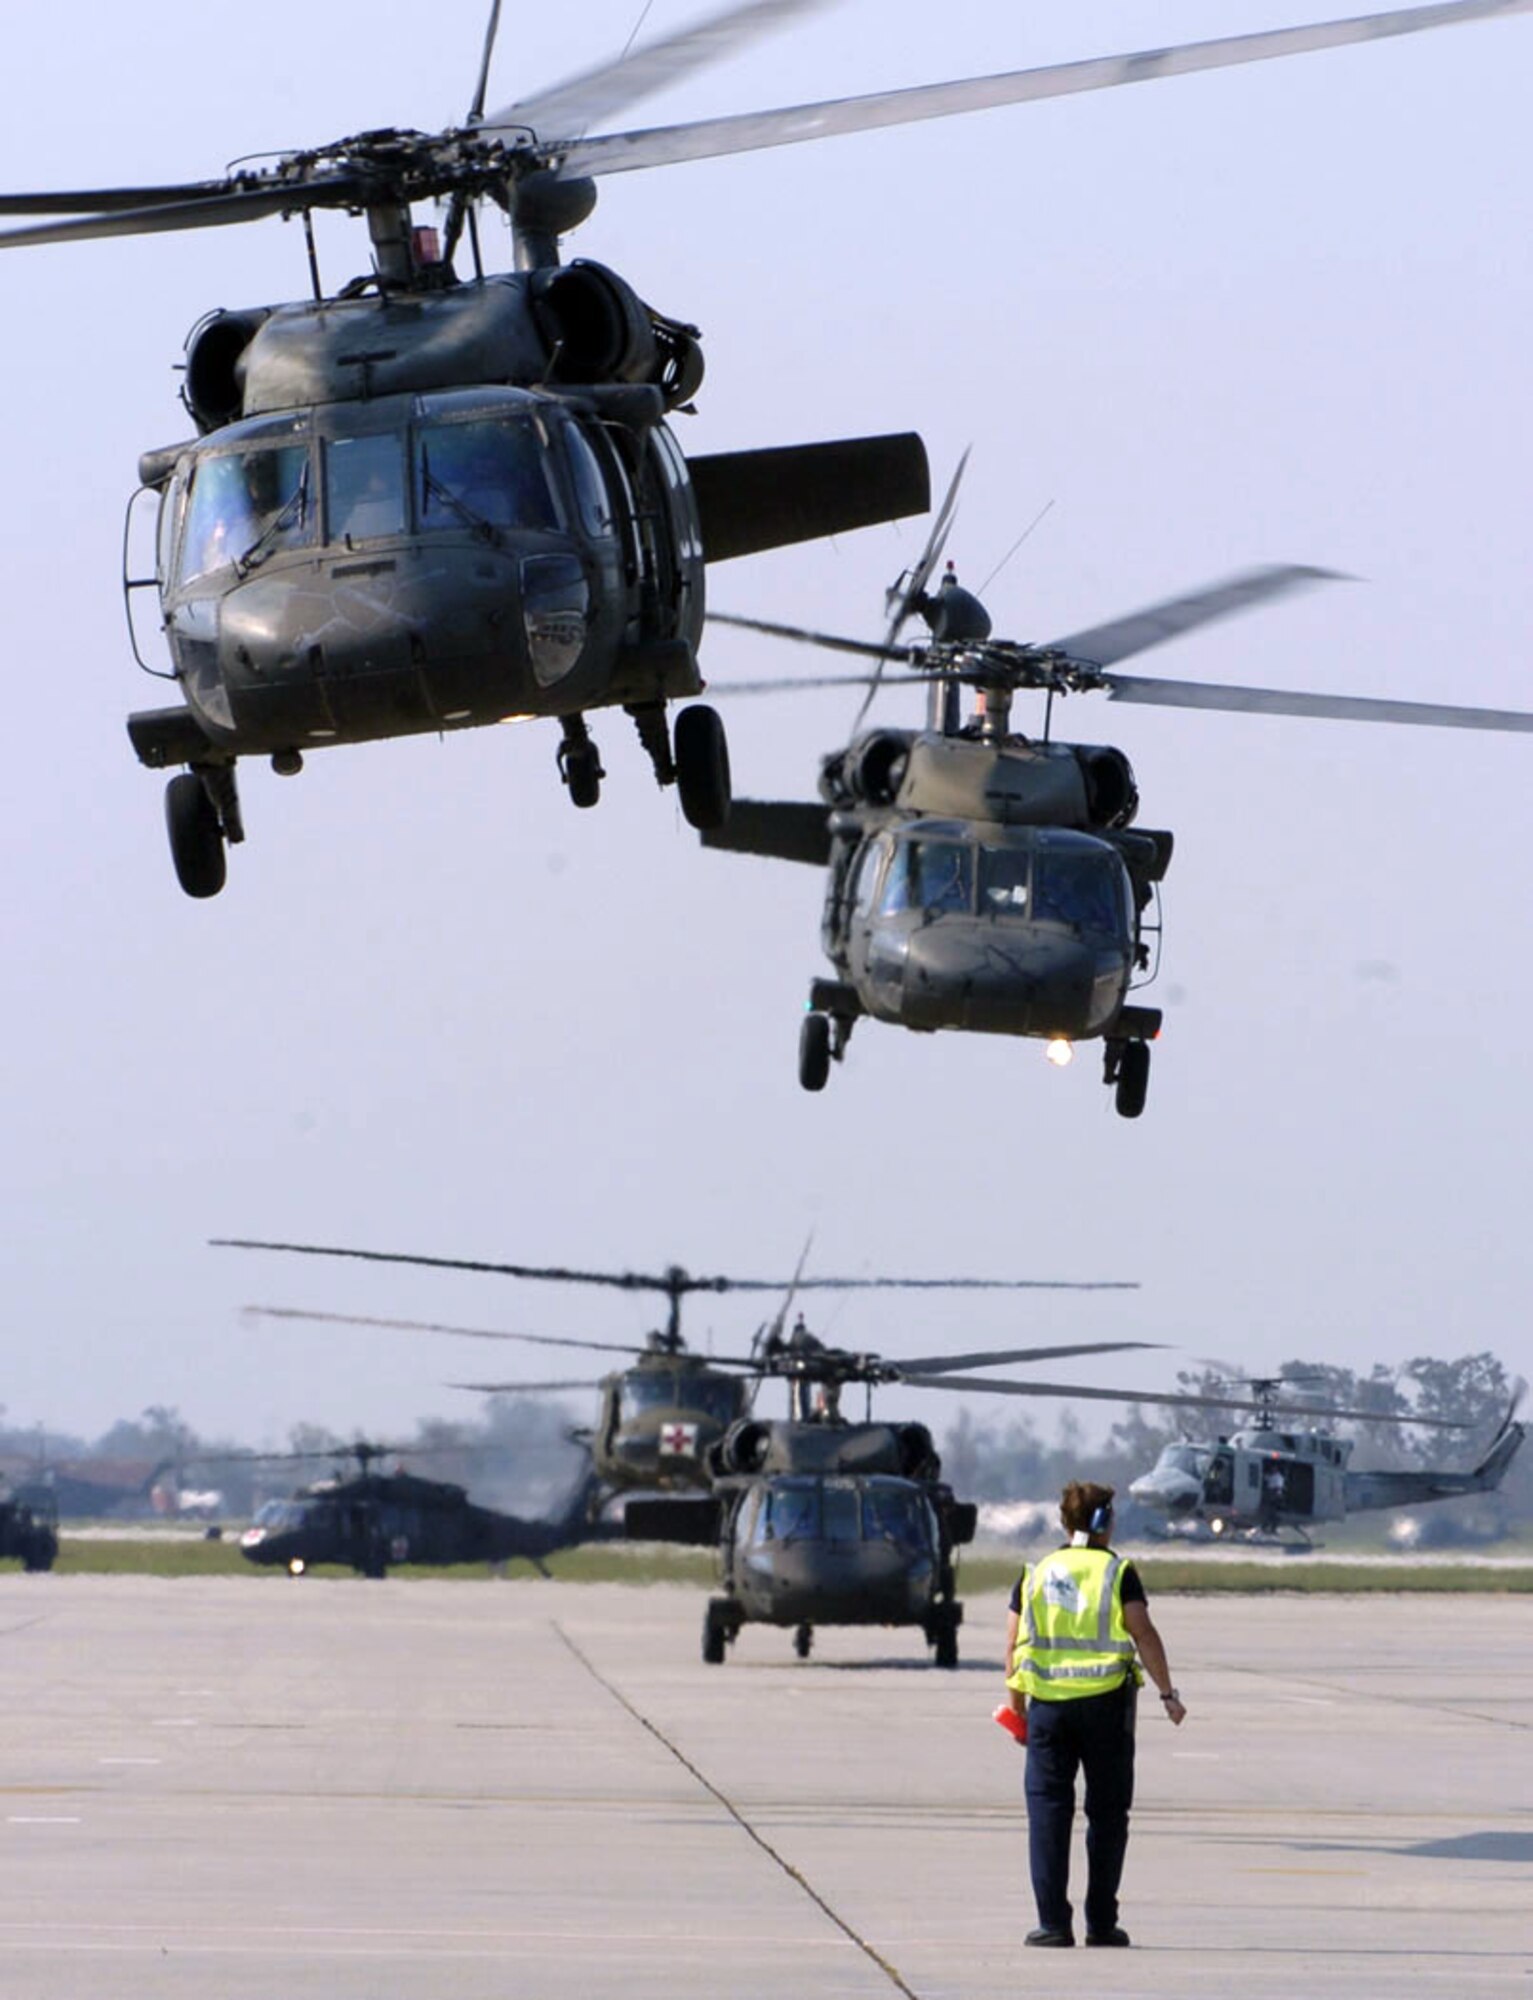 NEW ORLEANS -- Army and Air Force rescue helicopters depart on their next mission Sept. 2.  They are part of a massive operation to evacuate victims in the wake of Hurricane Katrina.  (U.S. Air Force photo by Master Sgt. Jack Braden)